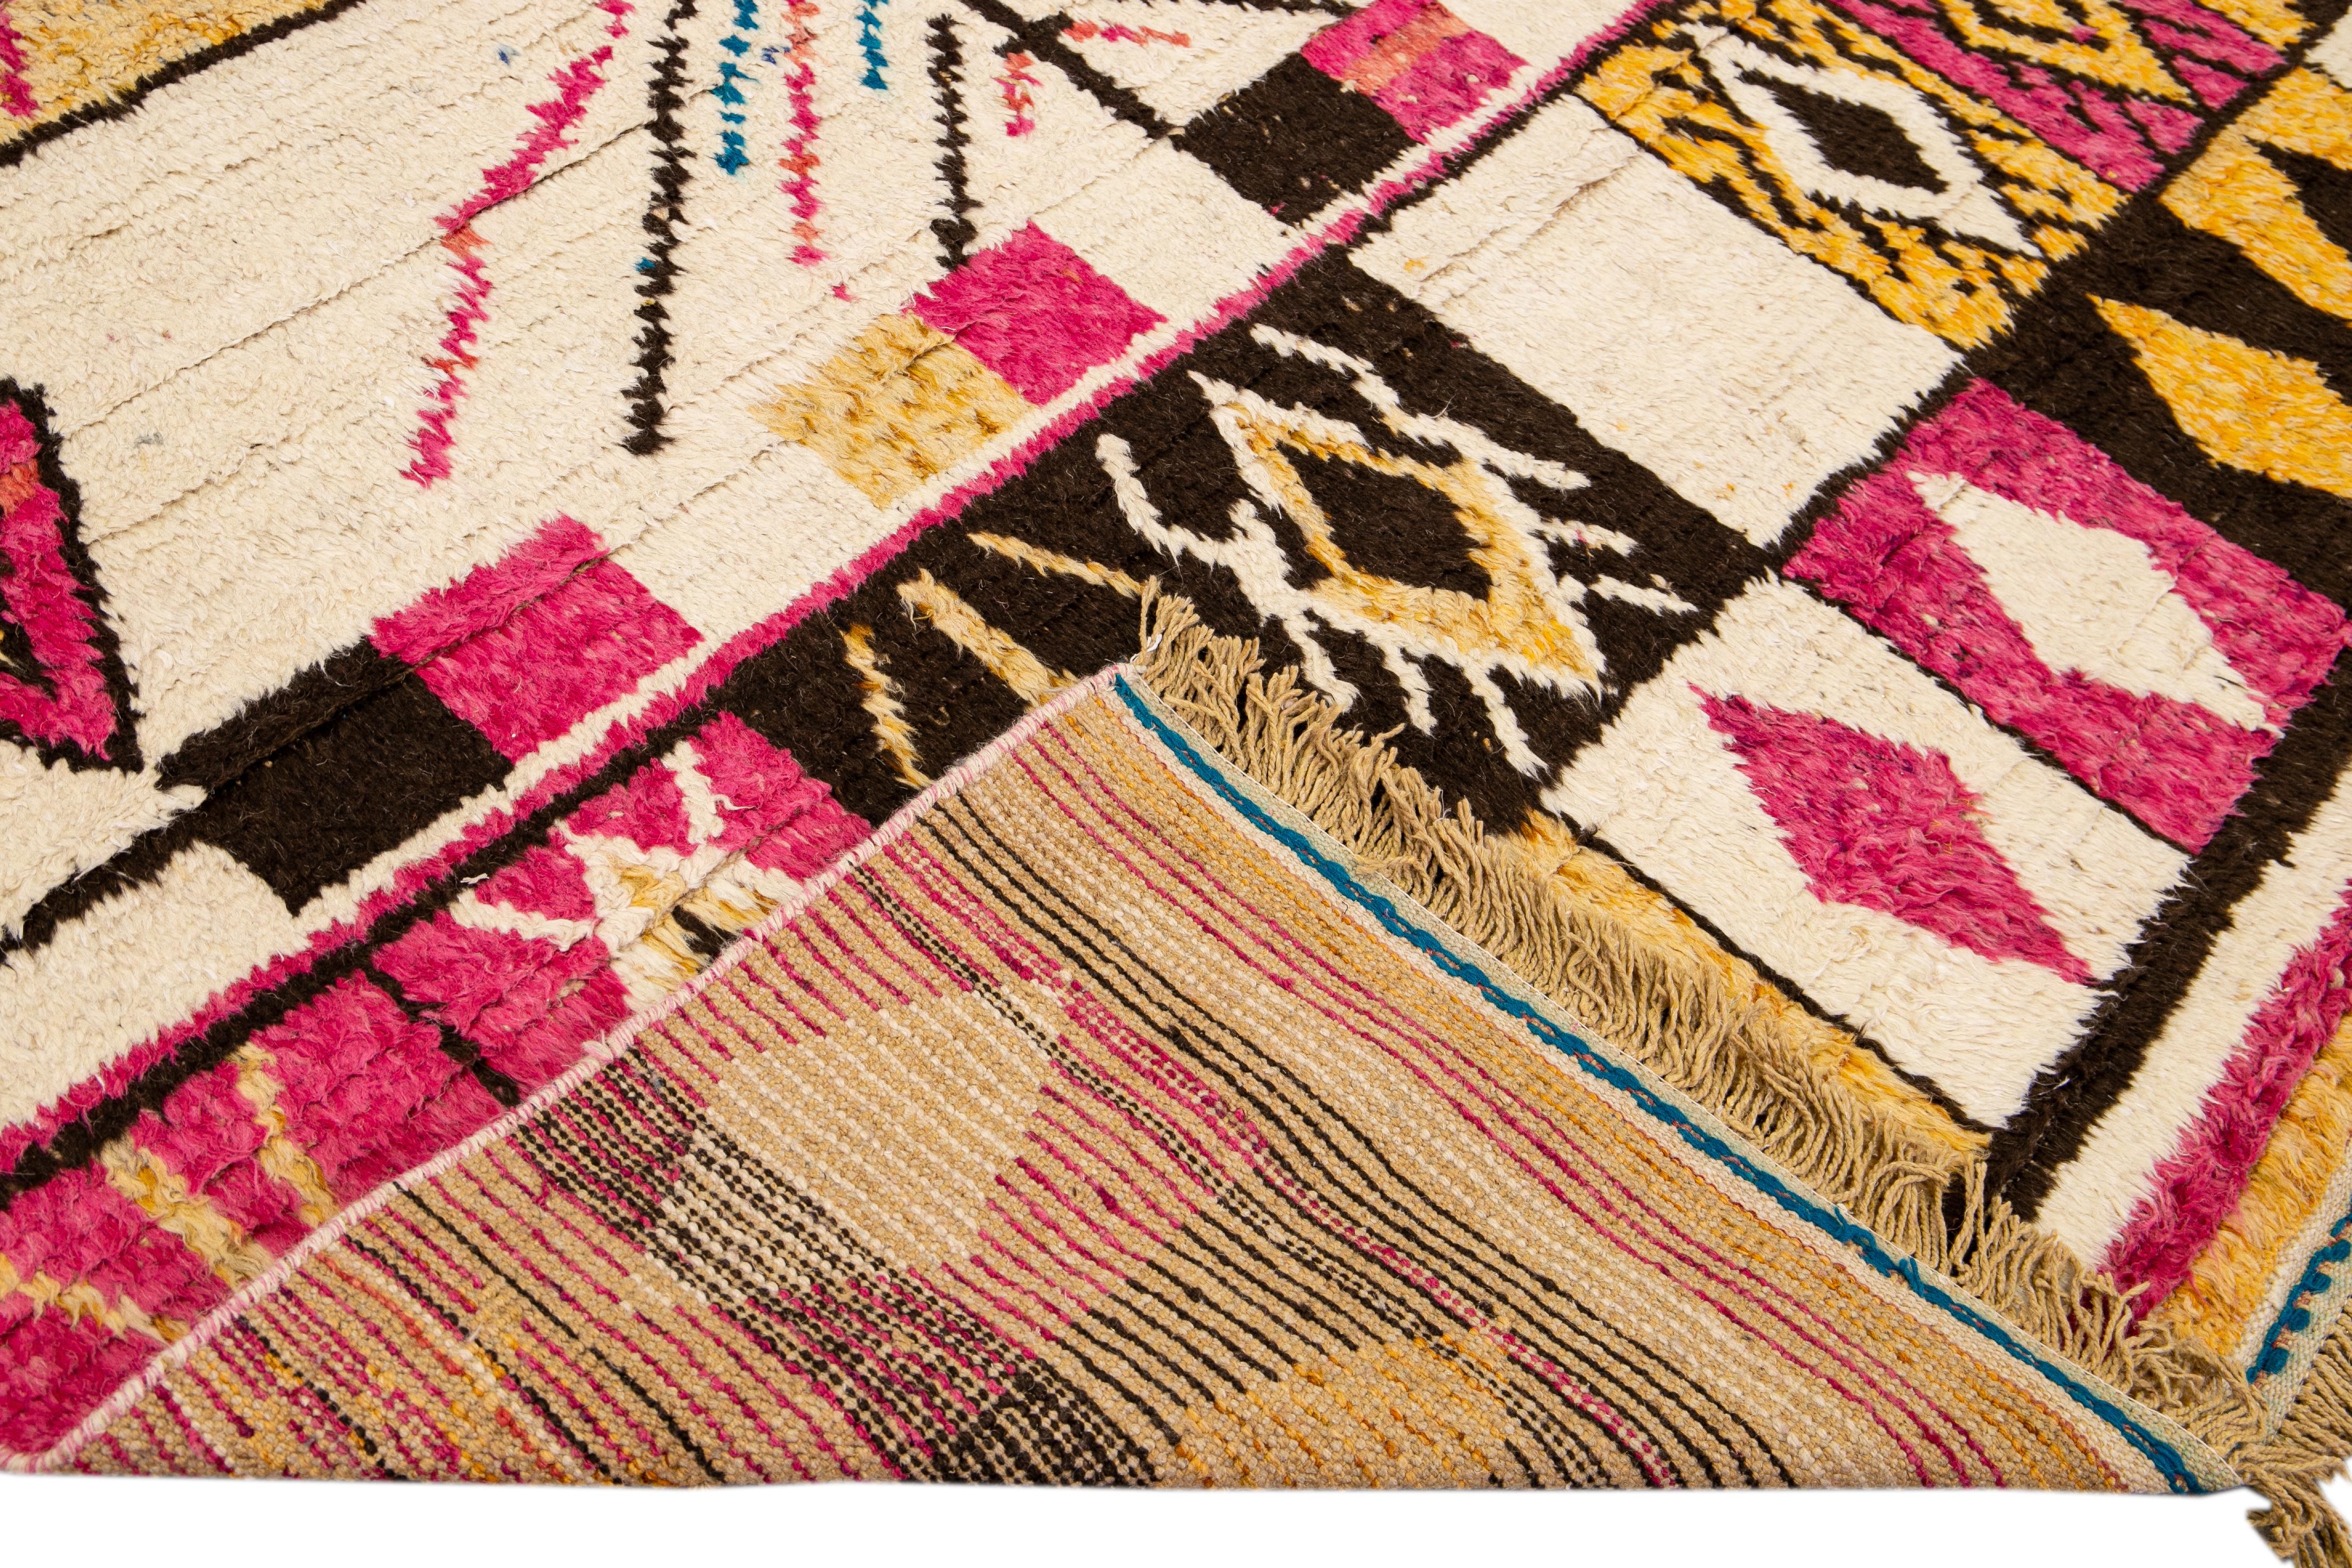 Beautiful Moroccan style handmade wool rug with a beige field. This Modern rug has pink, brown, blue, yellow accents and tan fringes featuring a gorgeous all-over geometric boho tribal design.

This rug measures: 8' x 10'4